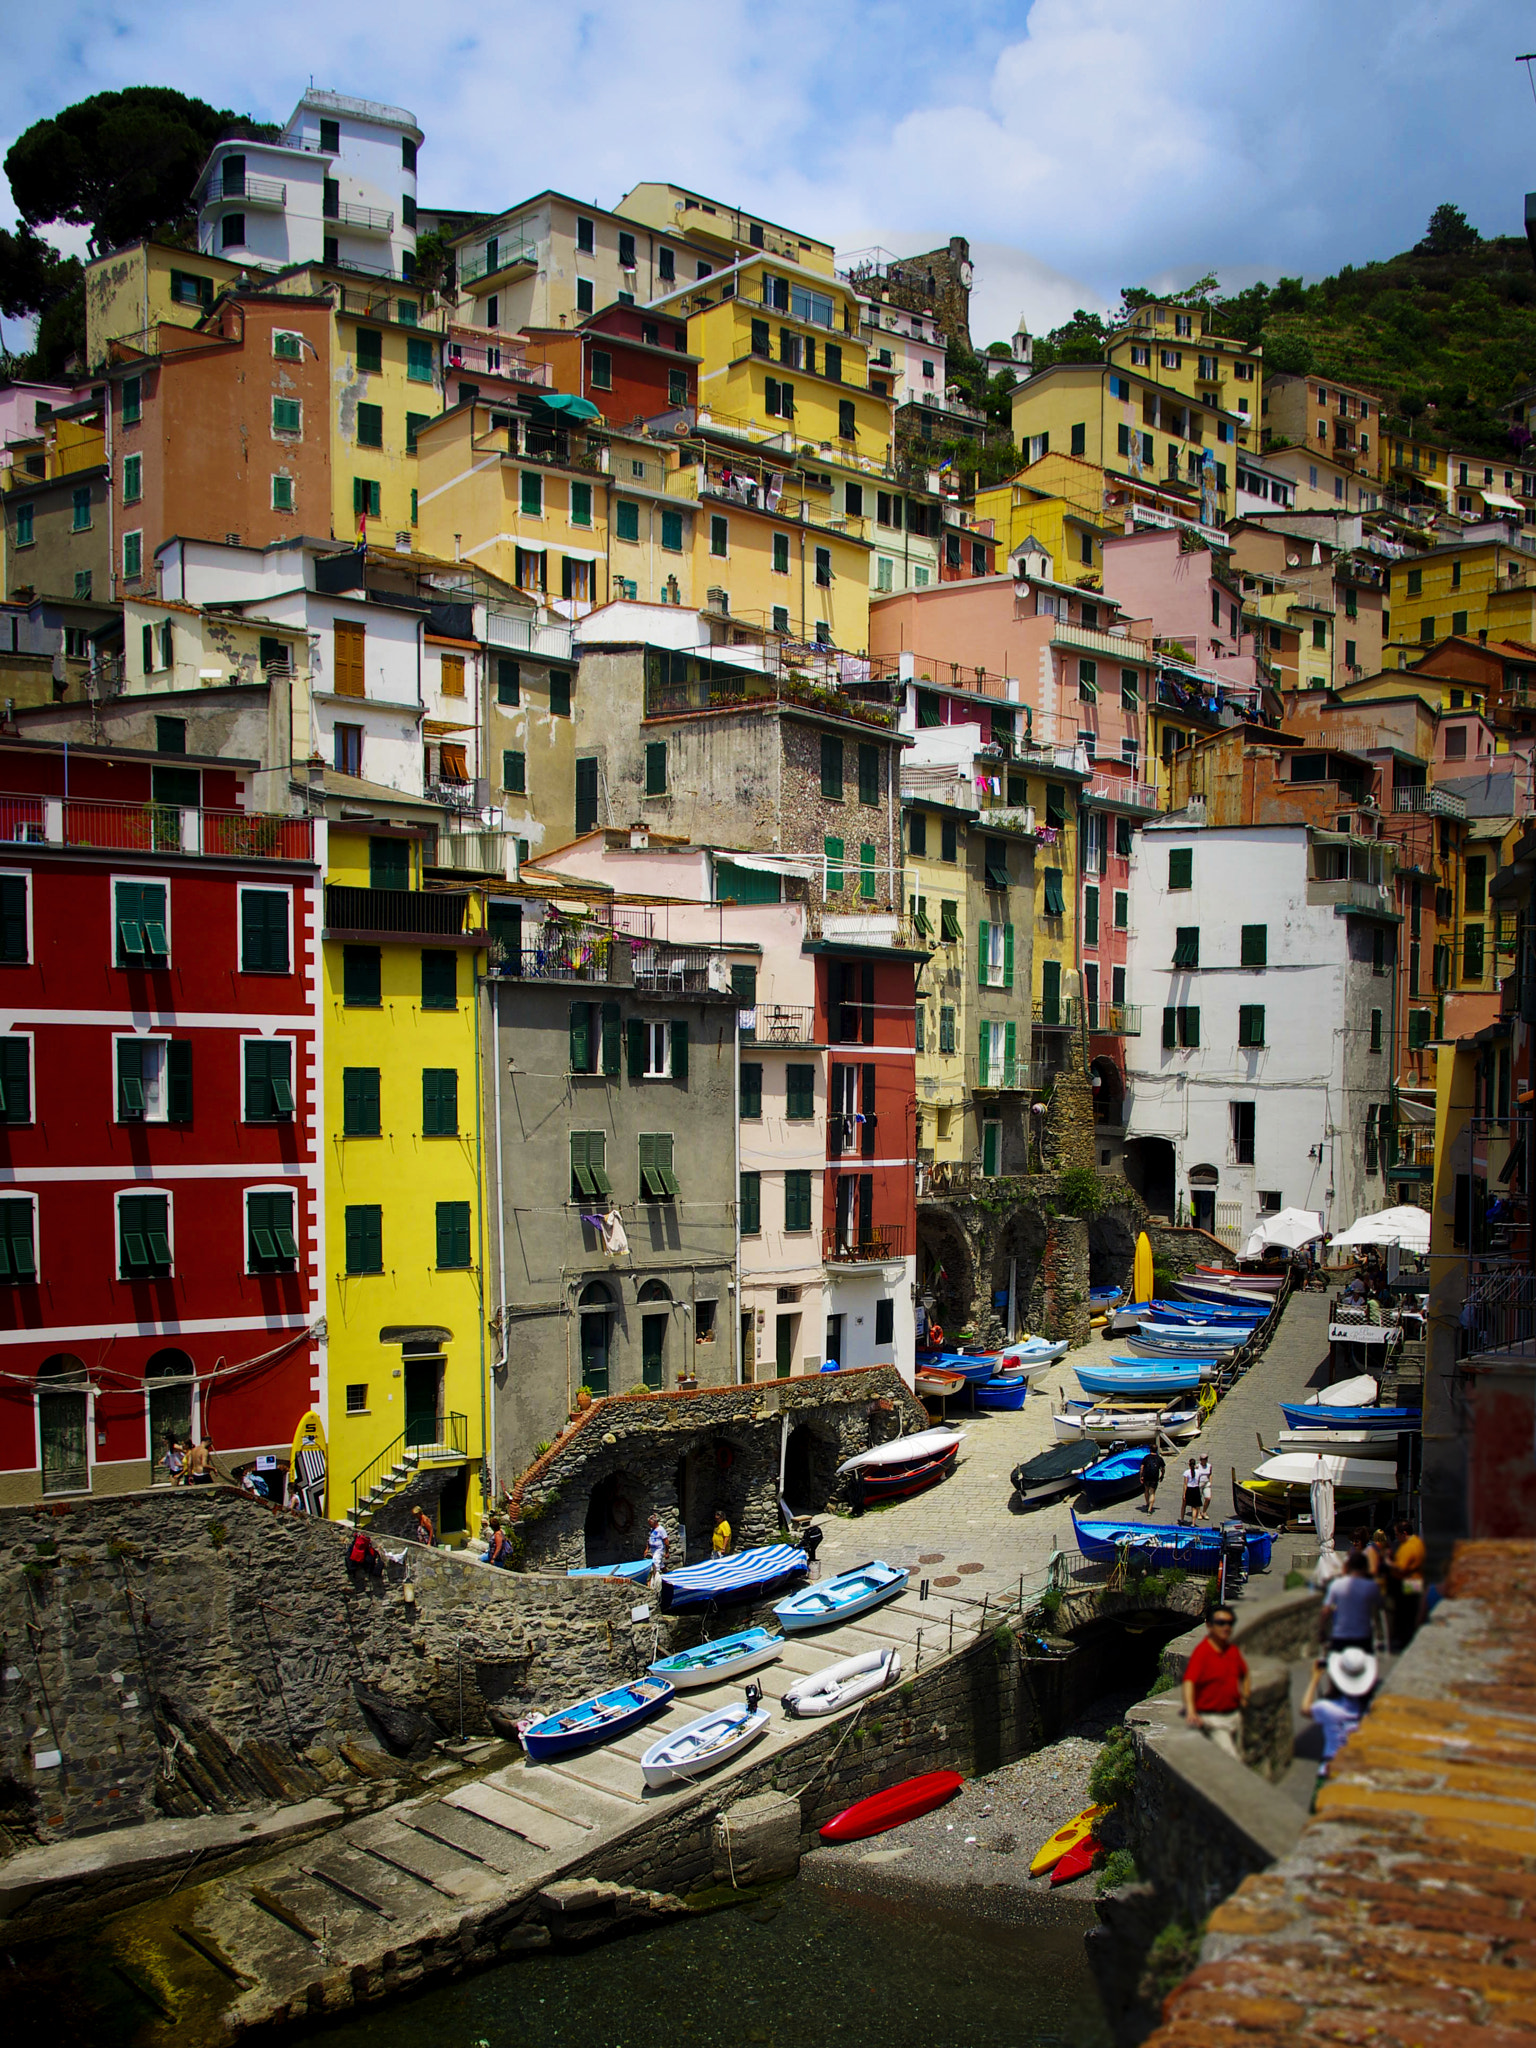 Pentax K-5 sample photo. The cinque terre, italy photography